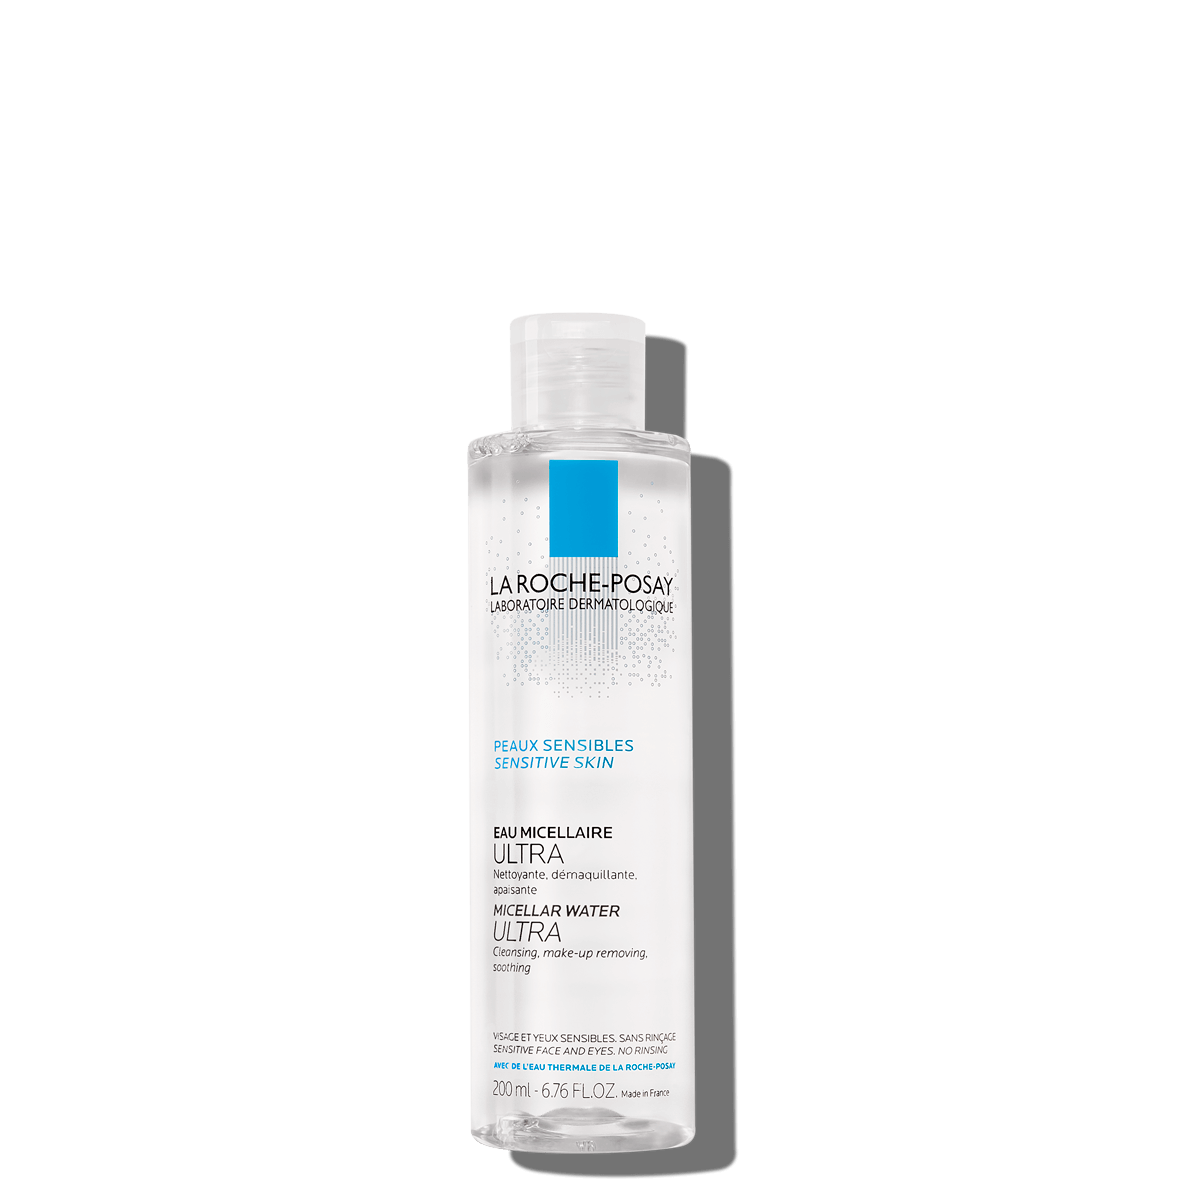 La Roche Posay ProductPage Face Cleanser Physiological Micellar Ultra 